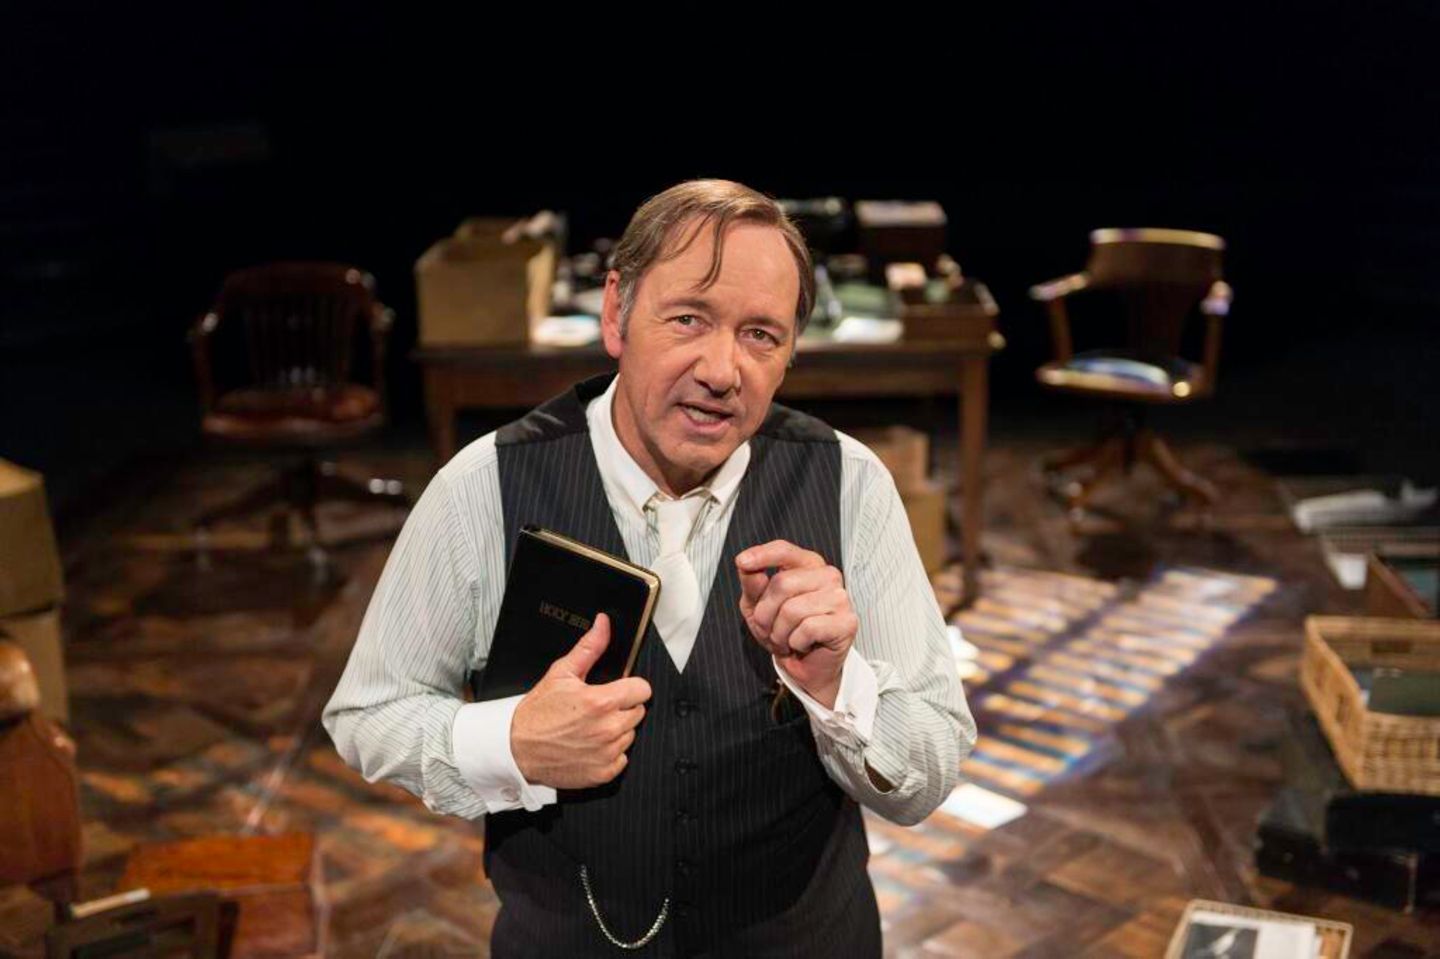 Kevin Spacey spielt in London im "The Old Vic Theatre" die Rolle des "Clarence Darrow".